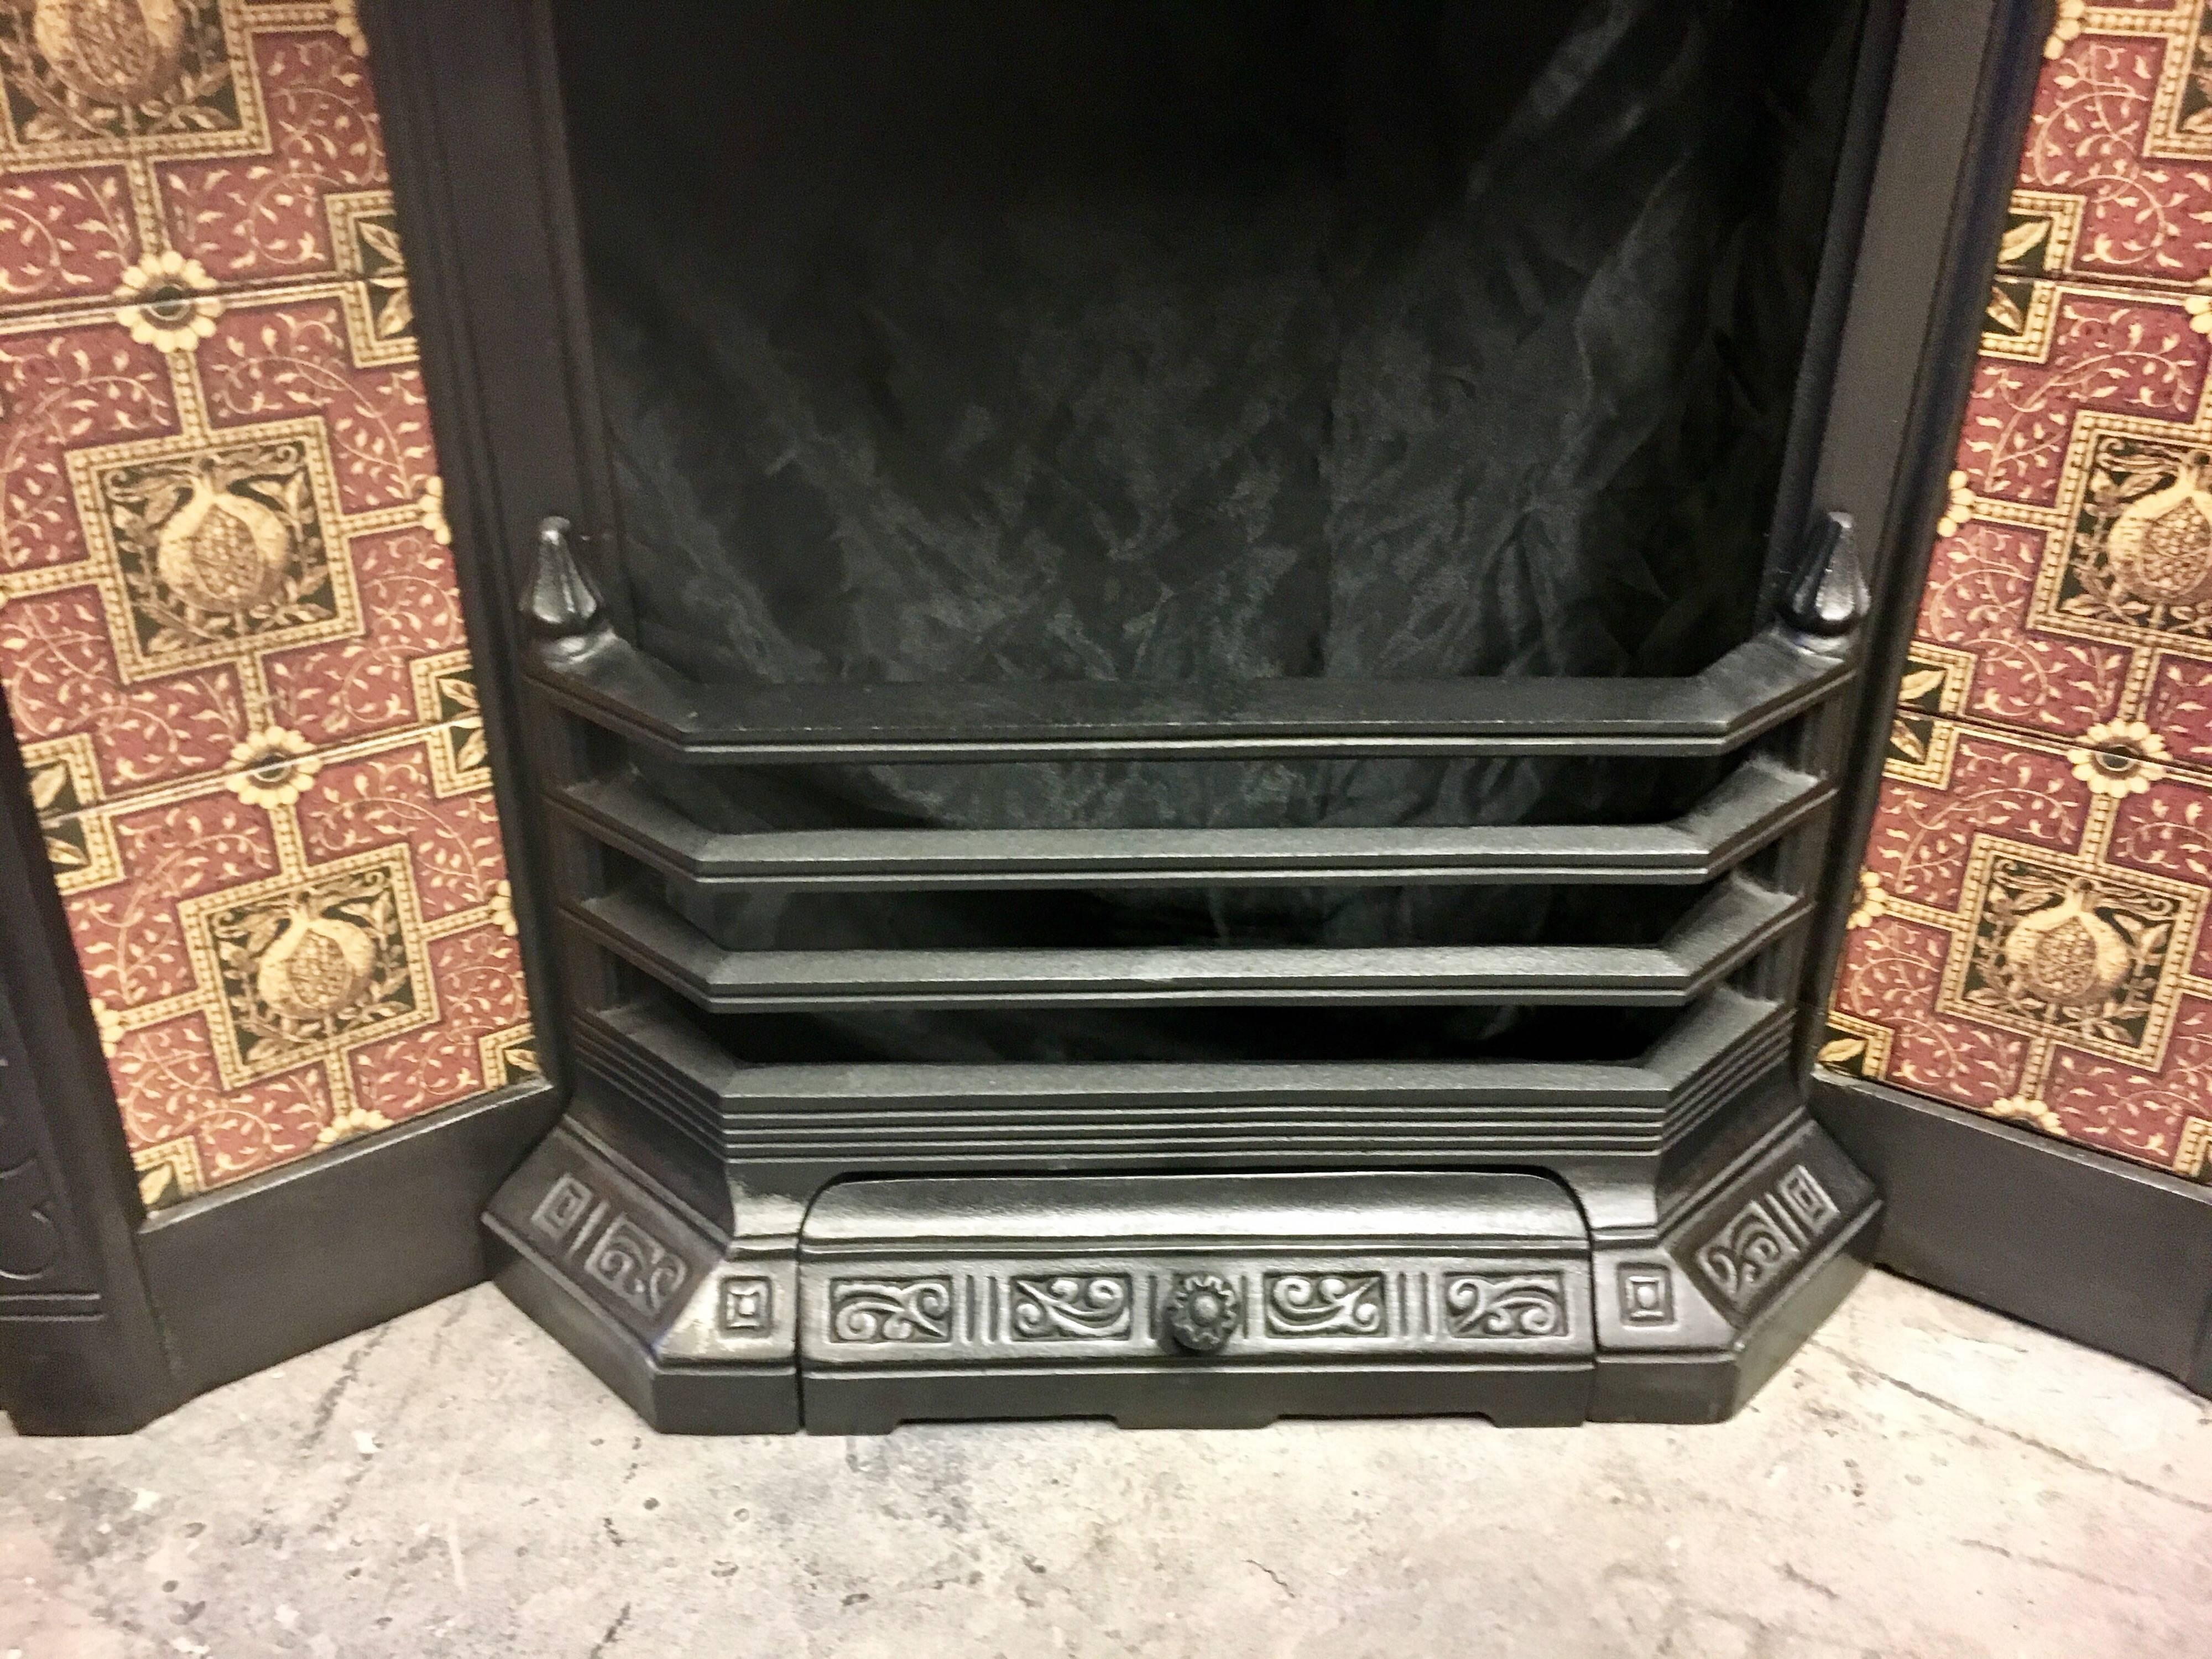 An antique Victorian 19th century cast iron tiled fireplace insert, a central Patrea to the hood with a well cast frame border holding red/yellow hand-painted tiles.

Scottish, circa 1890.